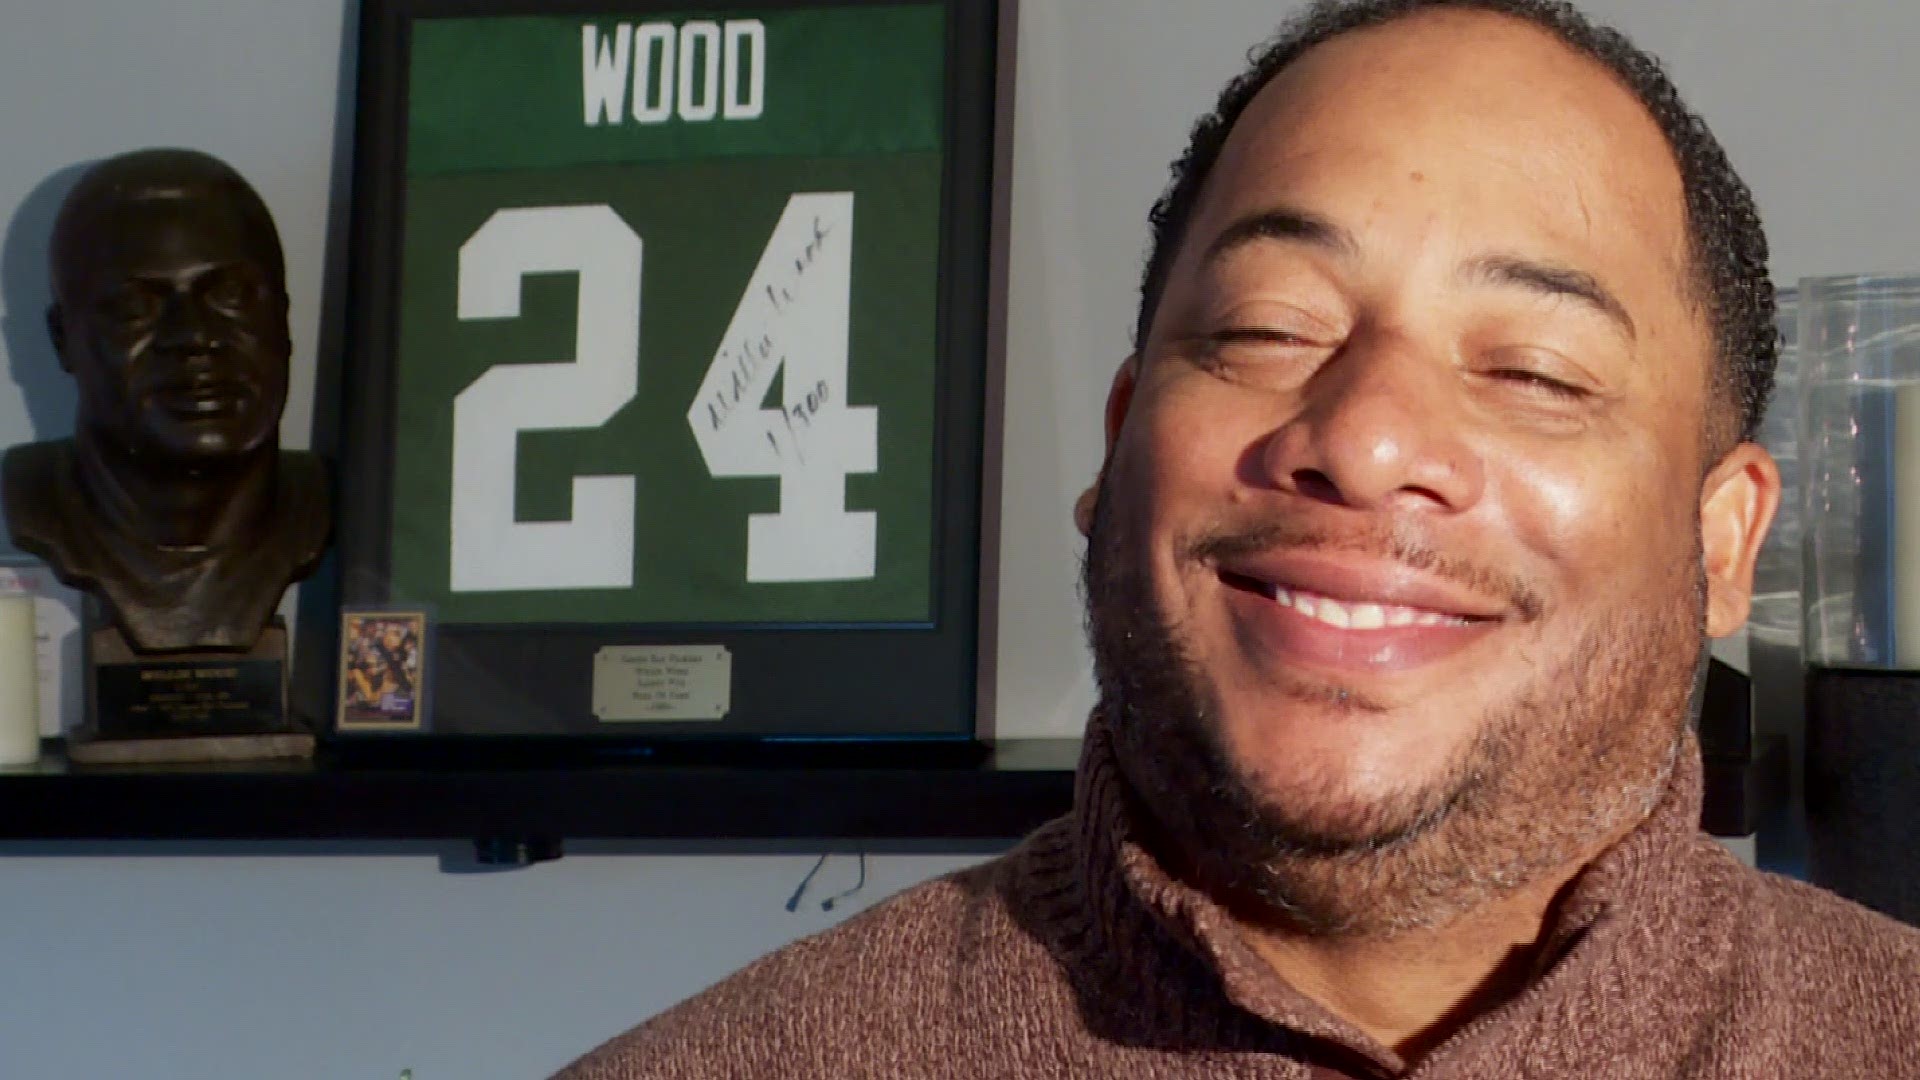 Willie Wood Jr. remembers his father's accomplishments on and off the football field.